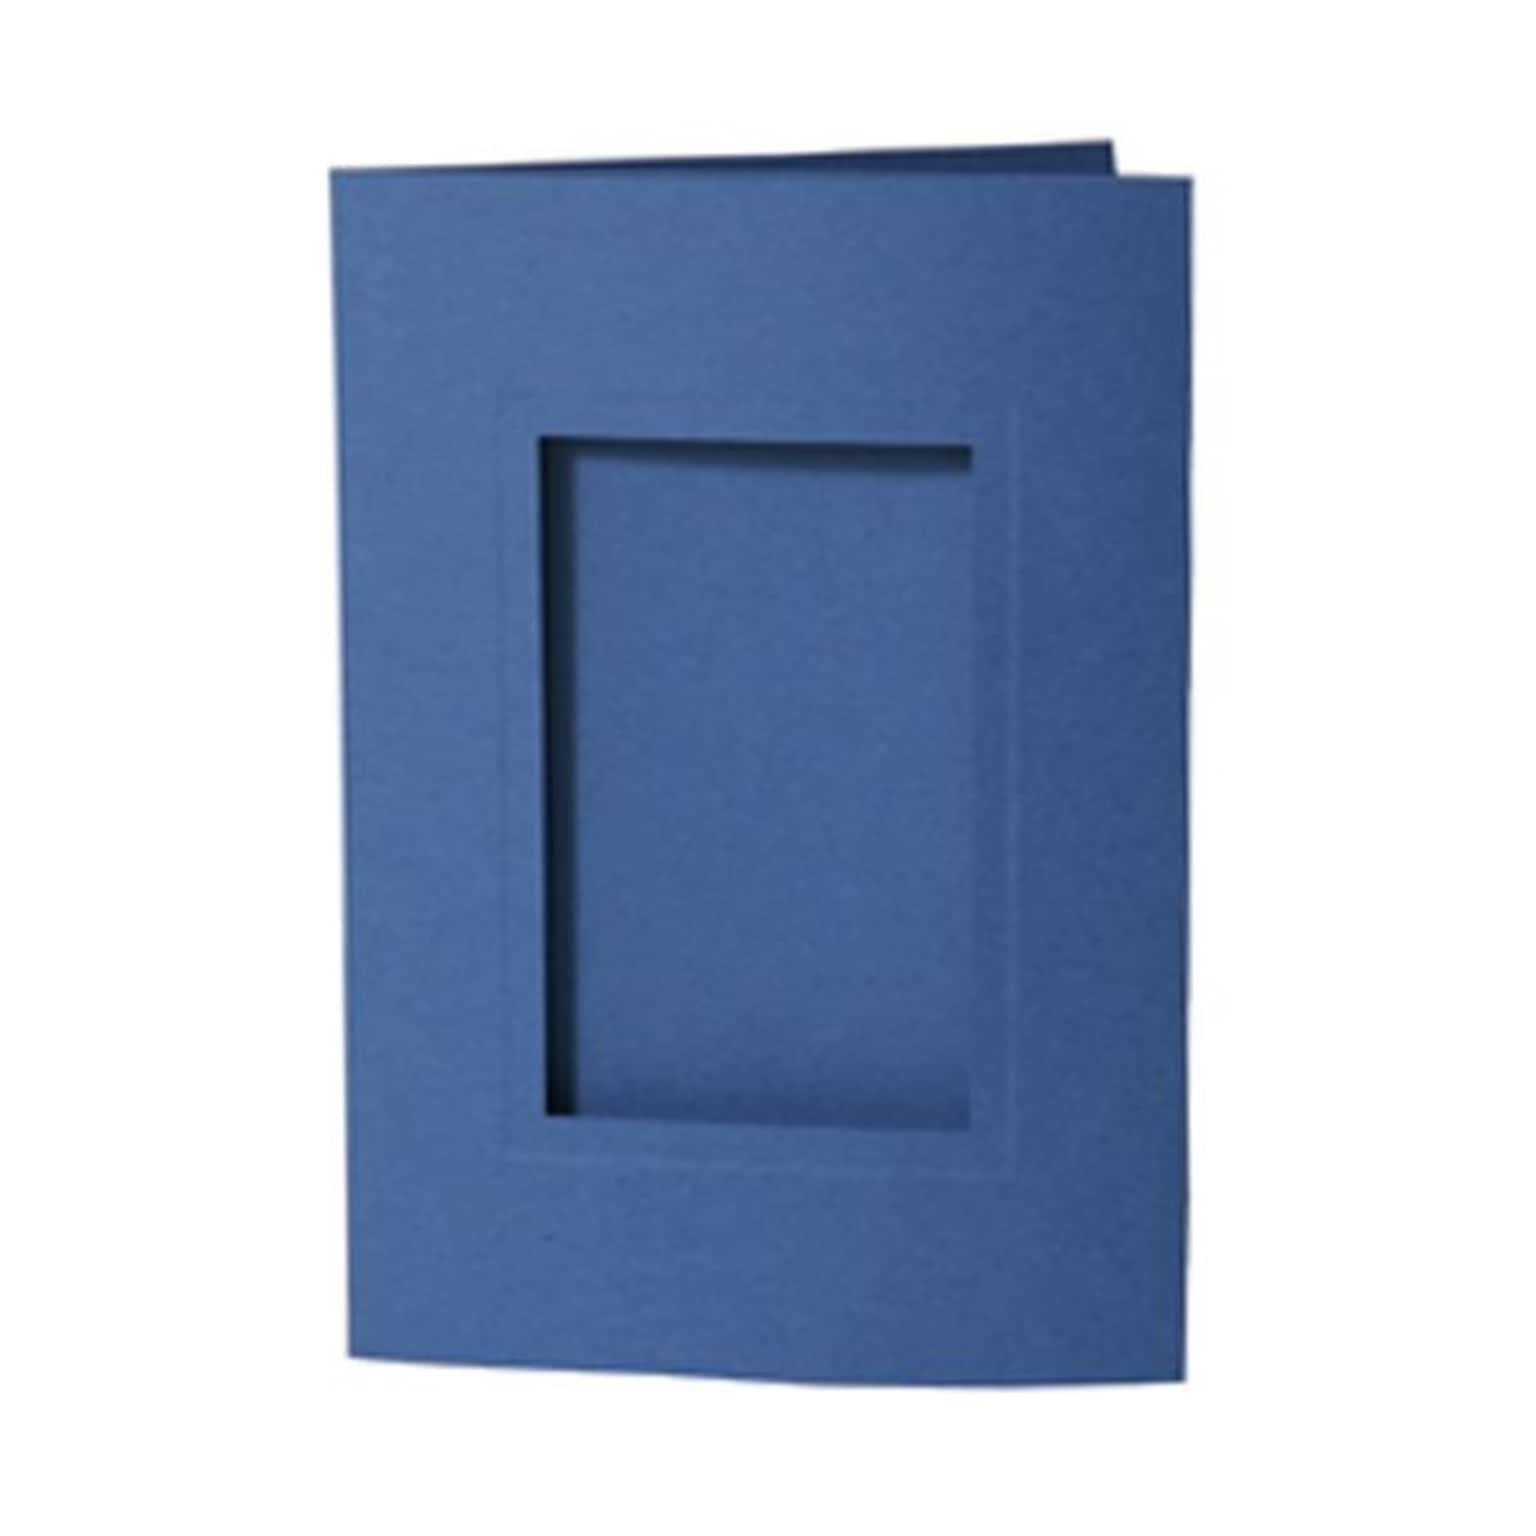 JAM Paper® Foldover Photo Cards, A7 size, 5 x 7, 2.5 x 4 Opening, Blue, 12/pack (1791033)